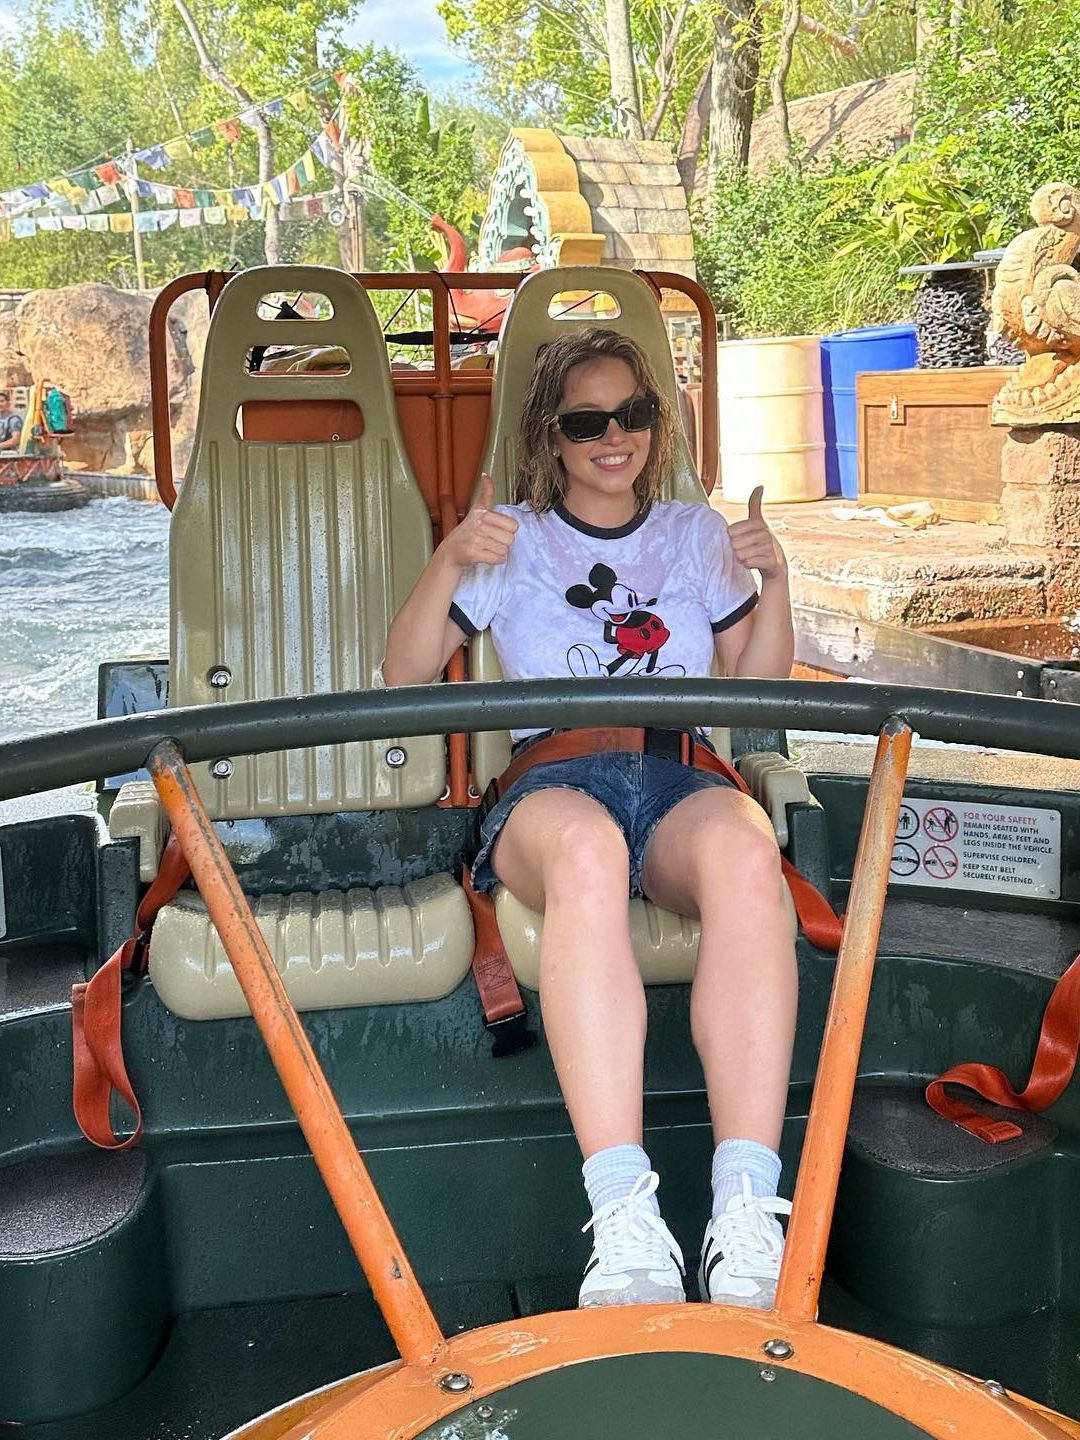 Sydney Sweeney poses on a water ride at Disneyland